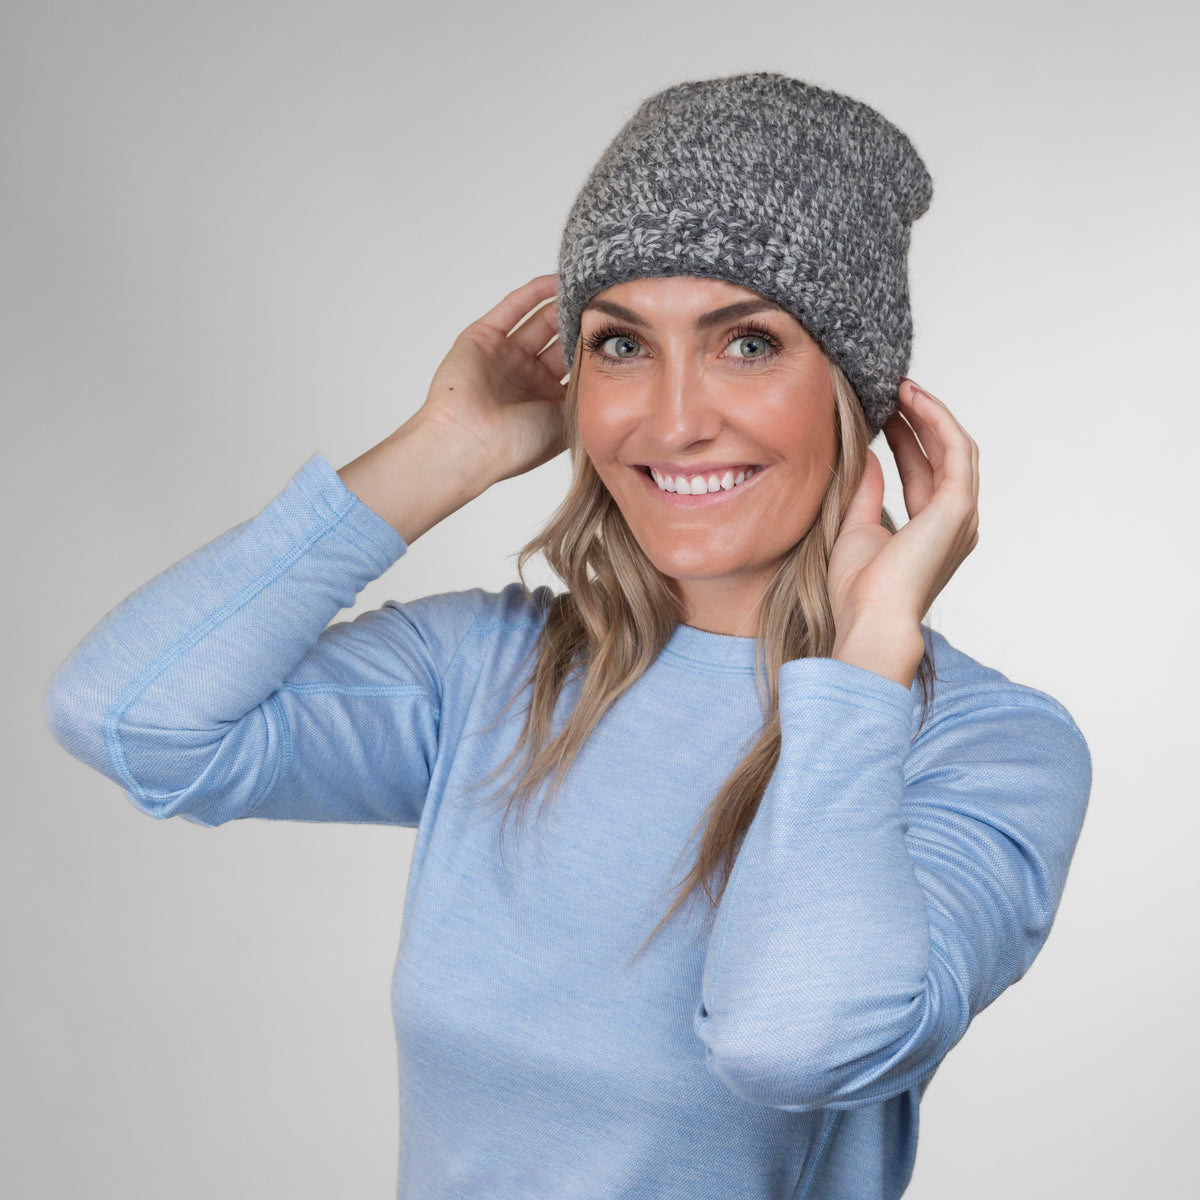 A smiling blonde woman pulling a hat down on her head in front of a white background. She is wearing a light blue long sleeve shirt and an Alpacas of Montana soft cozy comfortable stylish thermal fashionable moisture wicking antimicrobial knitted crochet mountaineer skullcap beanie hat handmade in Montana from light gray and multi-gray alpaca wool and bamboo yarn.